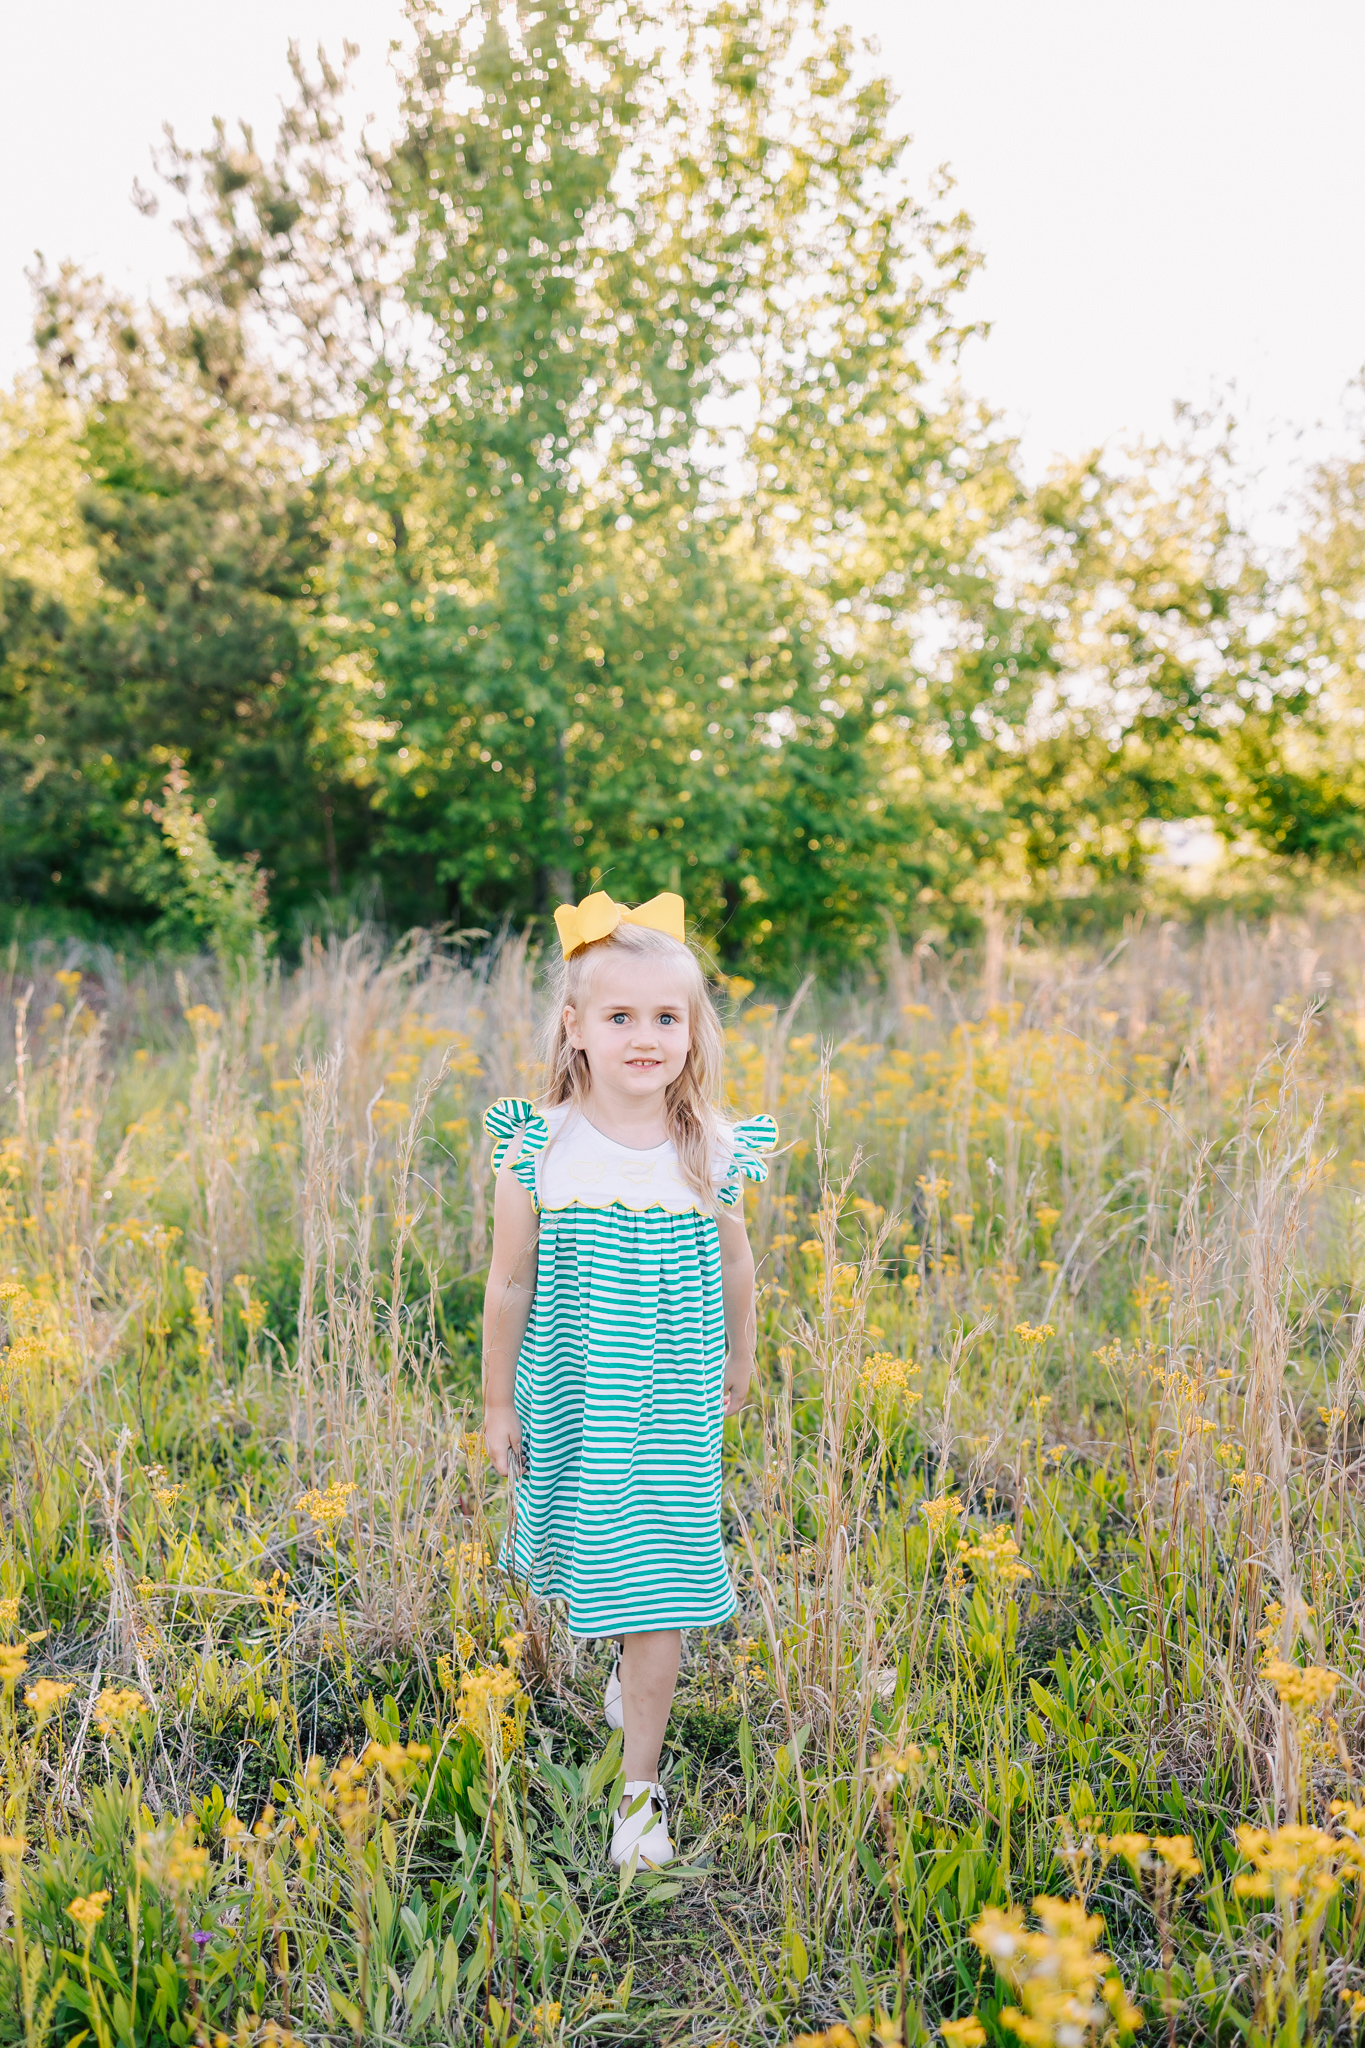 School aged girl walking through an open field with yellow flowers.